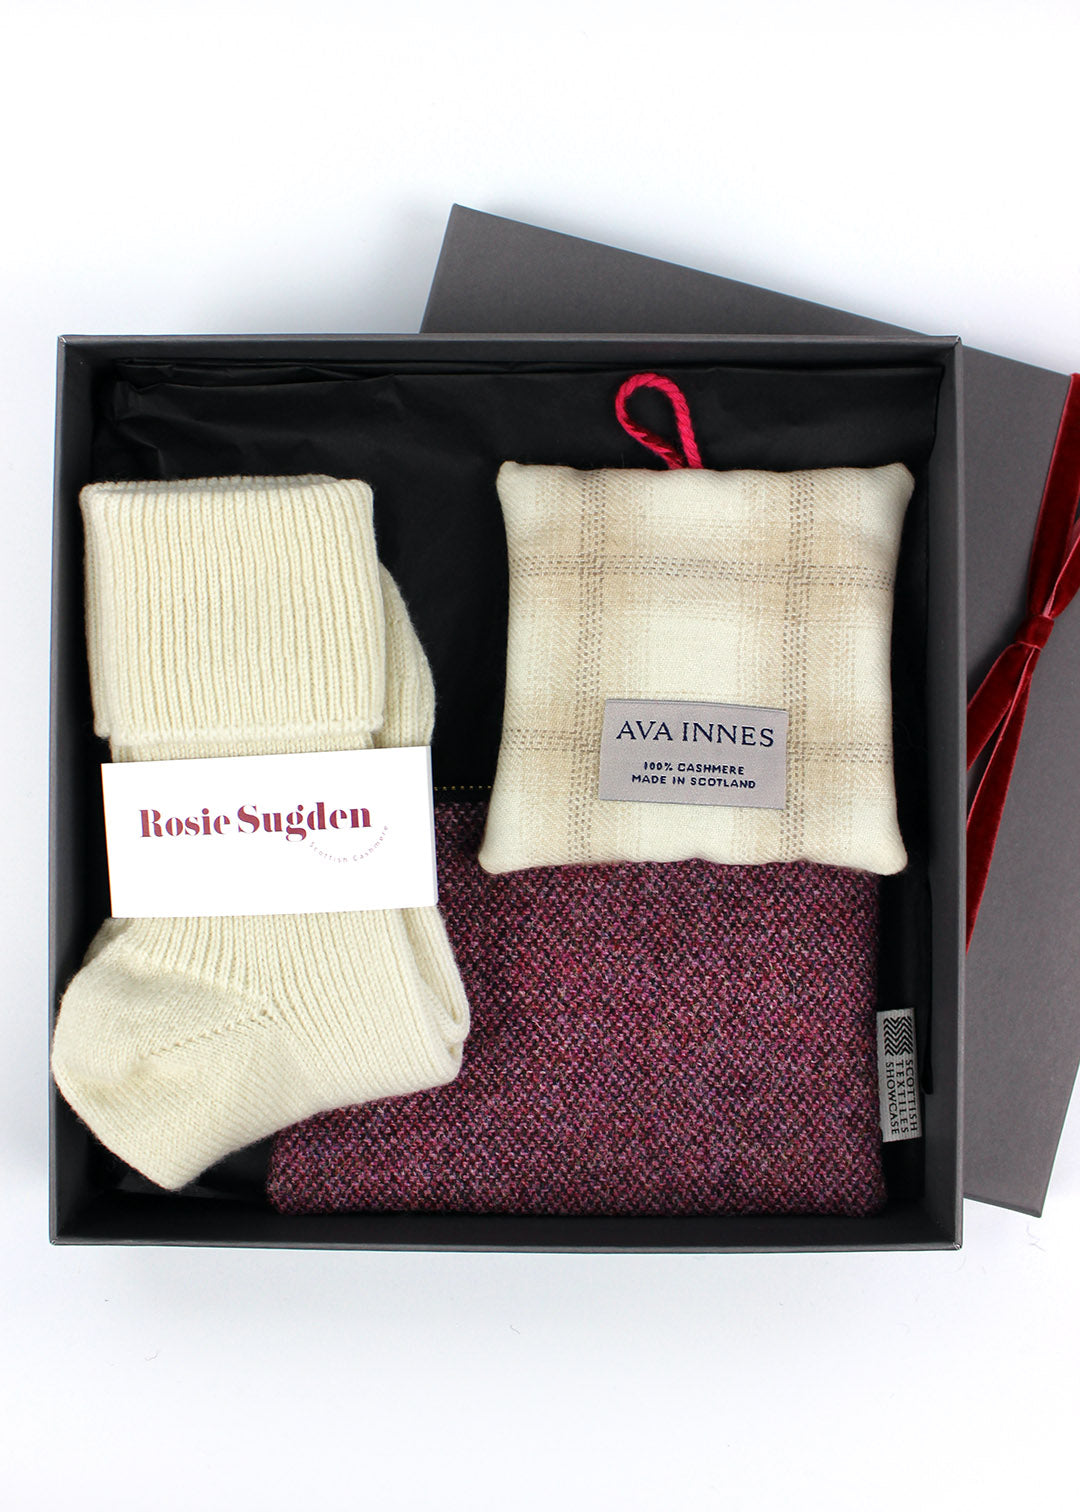 Valentines gift set with cashmere socks, lavender hanger and tweed purse. Scottish Textiles Showcase.